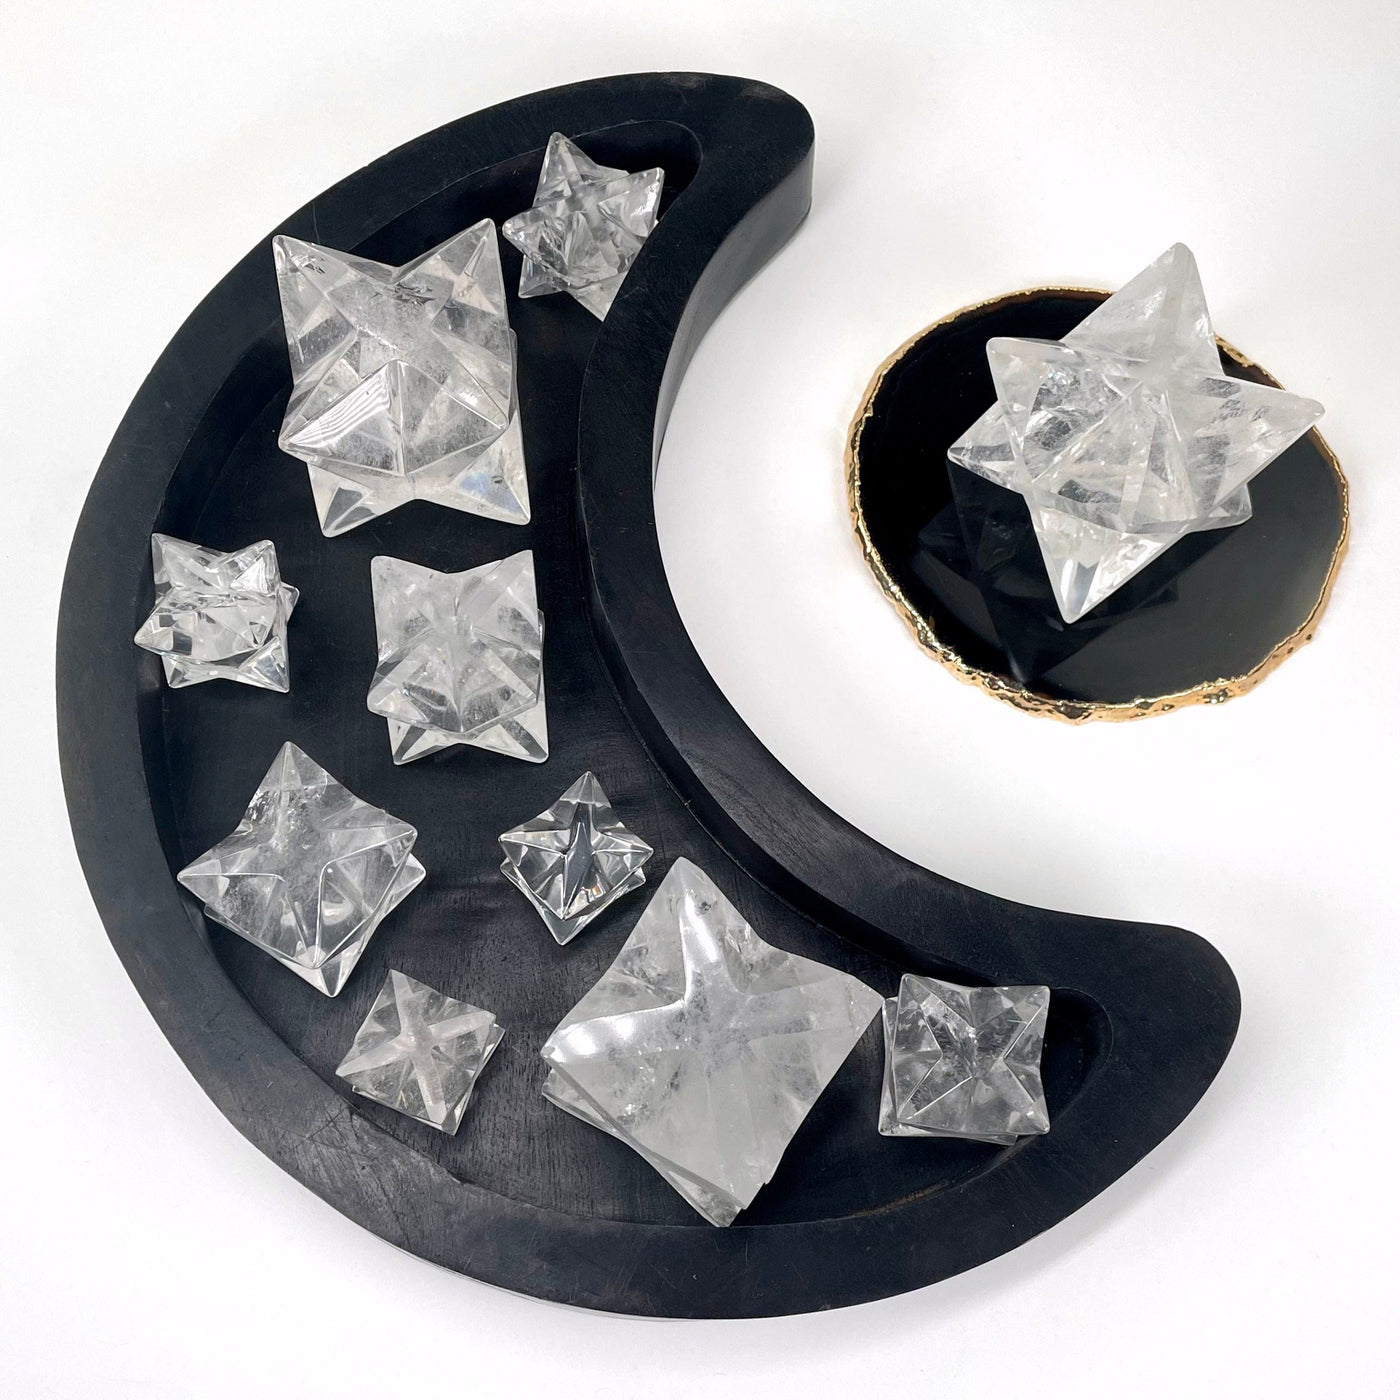 many crystal merkabah stars on display for possible variations